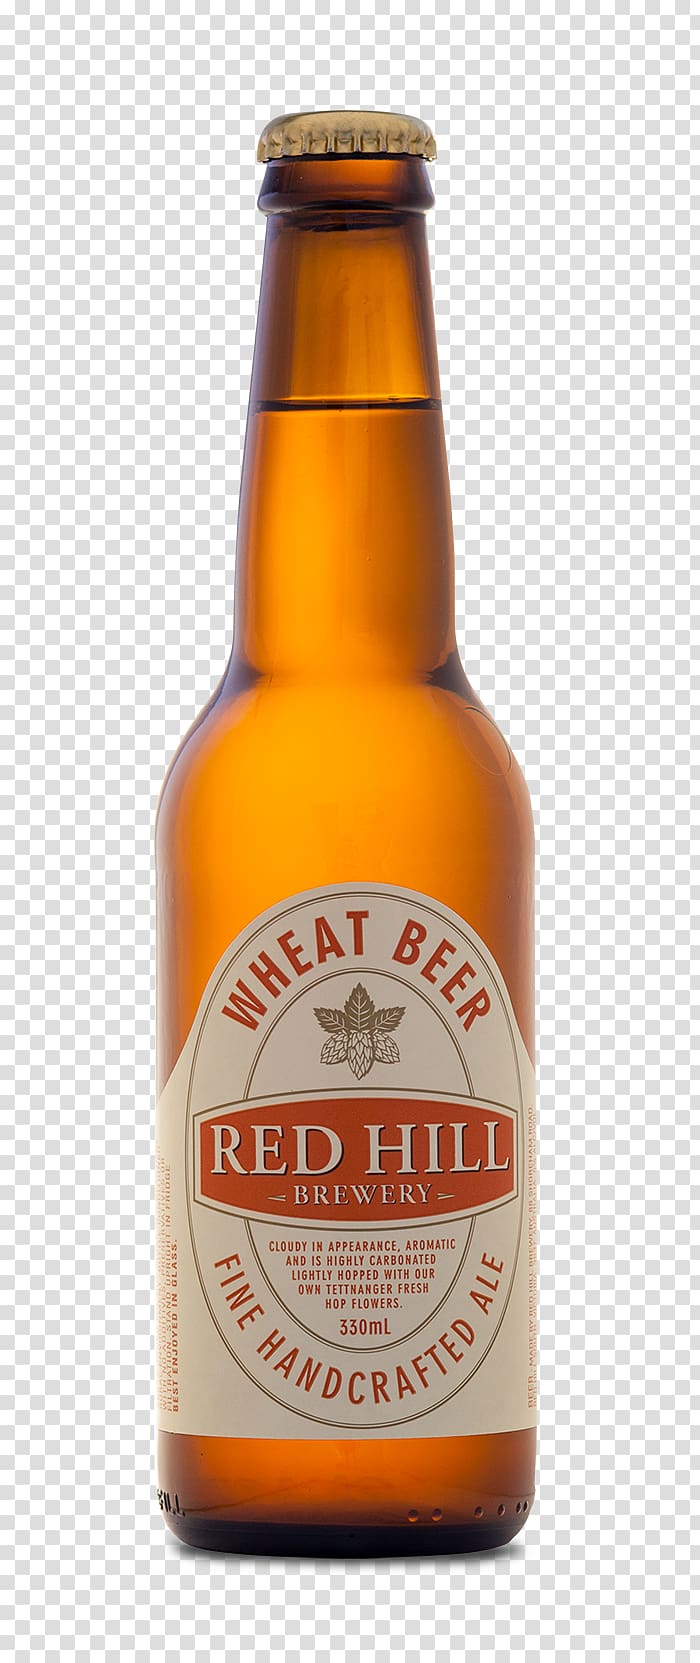 Red Hill wheat beer bottle, Ale Lager Wheat beer Beer bottle, beer transparent background PNG clipart